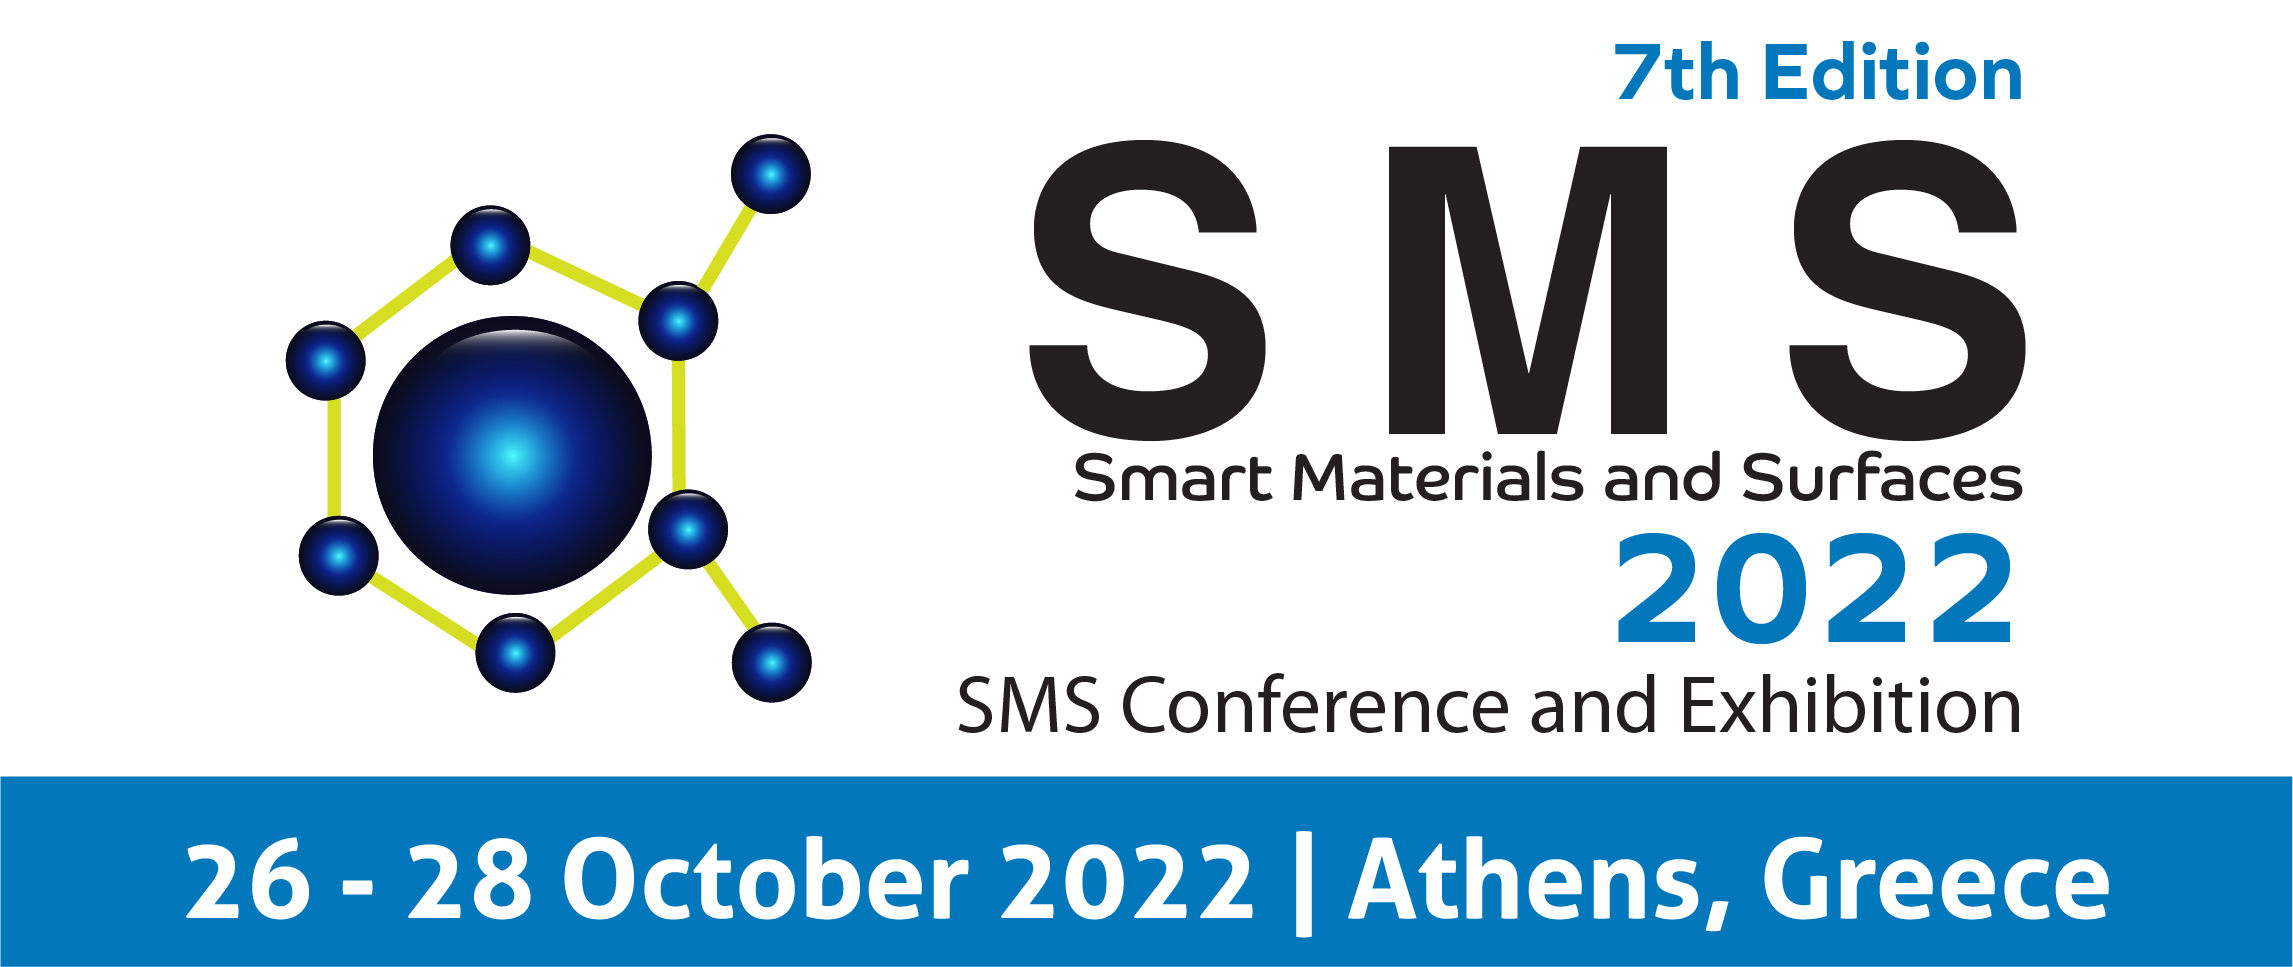 The 7th Ed. of the Smart Materials and Surfaces - SMS 2022 Conference